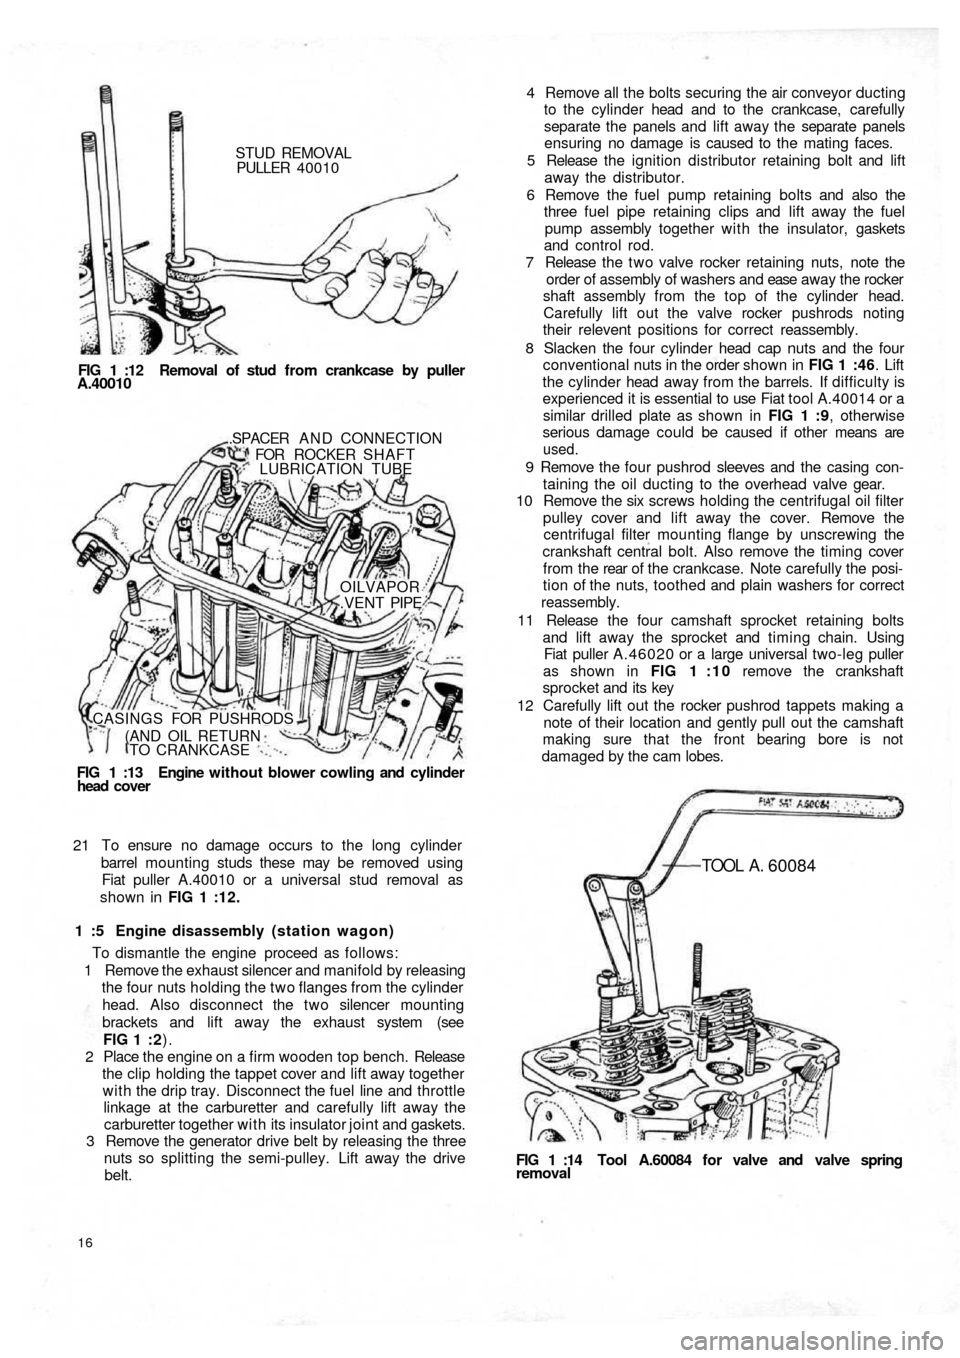 FIAT 500 1959 1.G Workshop Manual STUD REMOVAL
PULLER  40010
FIG 1 :12  Removal of stud from crankcase by puller
A.40010
FIG  1  :13   Engine  without blower cowling and cylinder
head  cover.SPACER  A N D  CONNECTION
FOR ROCKER SHAFT
